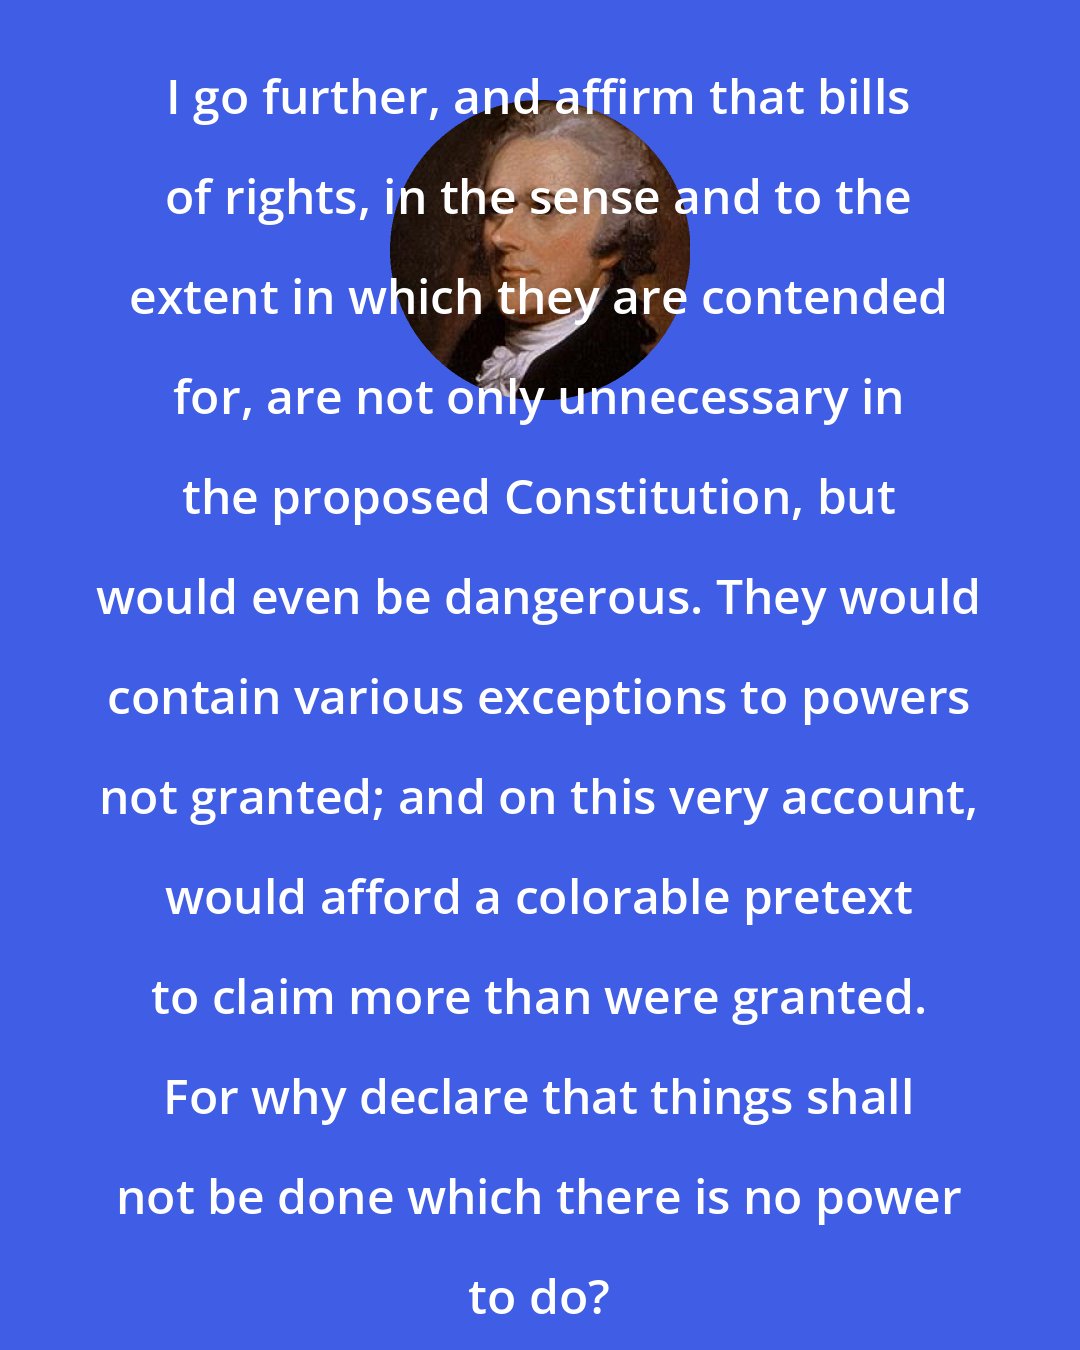 Alexander Hamilton: I go further, and affirm that bills of rights, in the sense and to the extent in which they are contended for, are not only unnecessary in the proposed Constitution, but would even be dangerous. They would contain various exceptions to powers not granted; and on this very account, would afford a colorable pretext to claim more than were granted. For why declare that things shall not be done which there is no power to do?